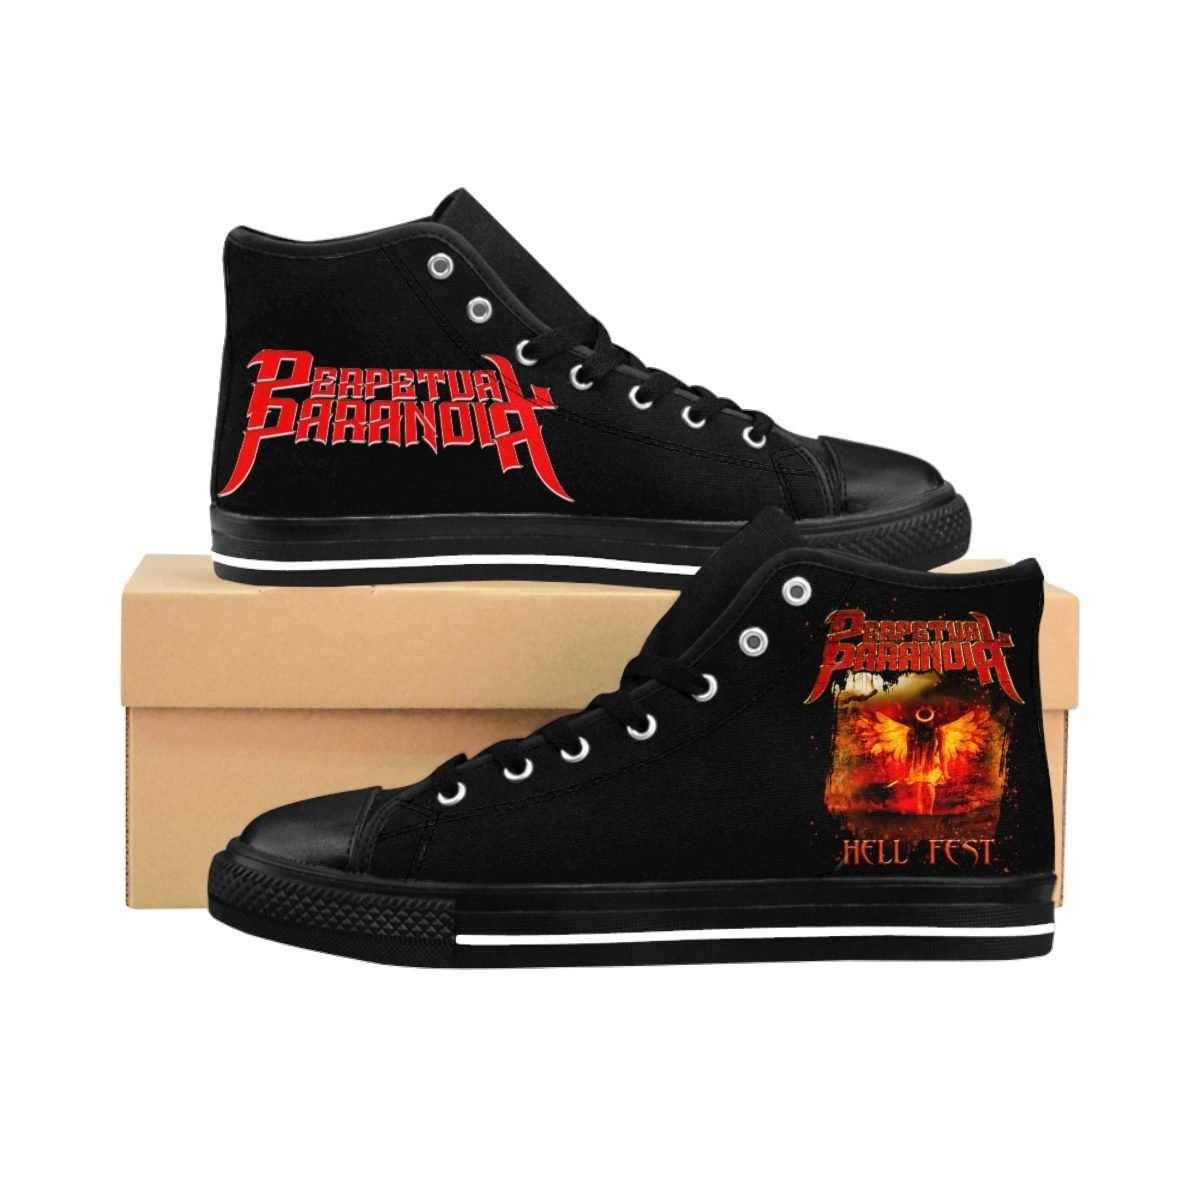 Perpetual Paranoia – Hell Fest Men’s High-top Sneakers